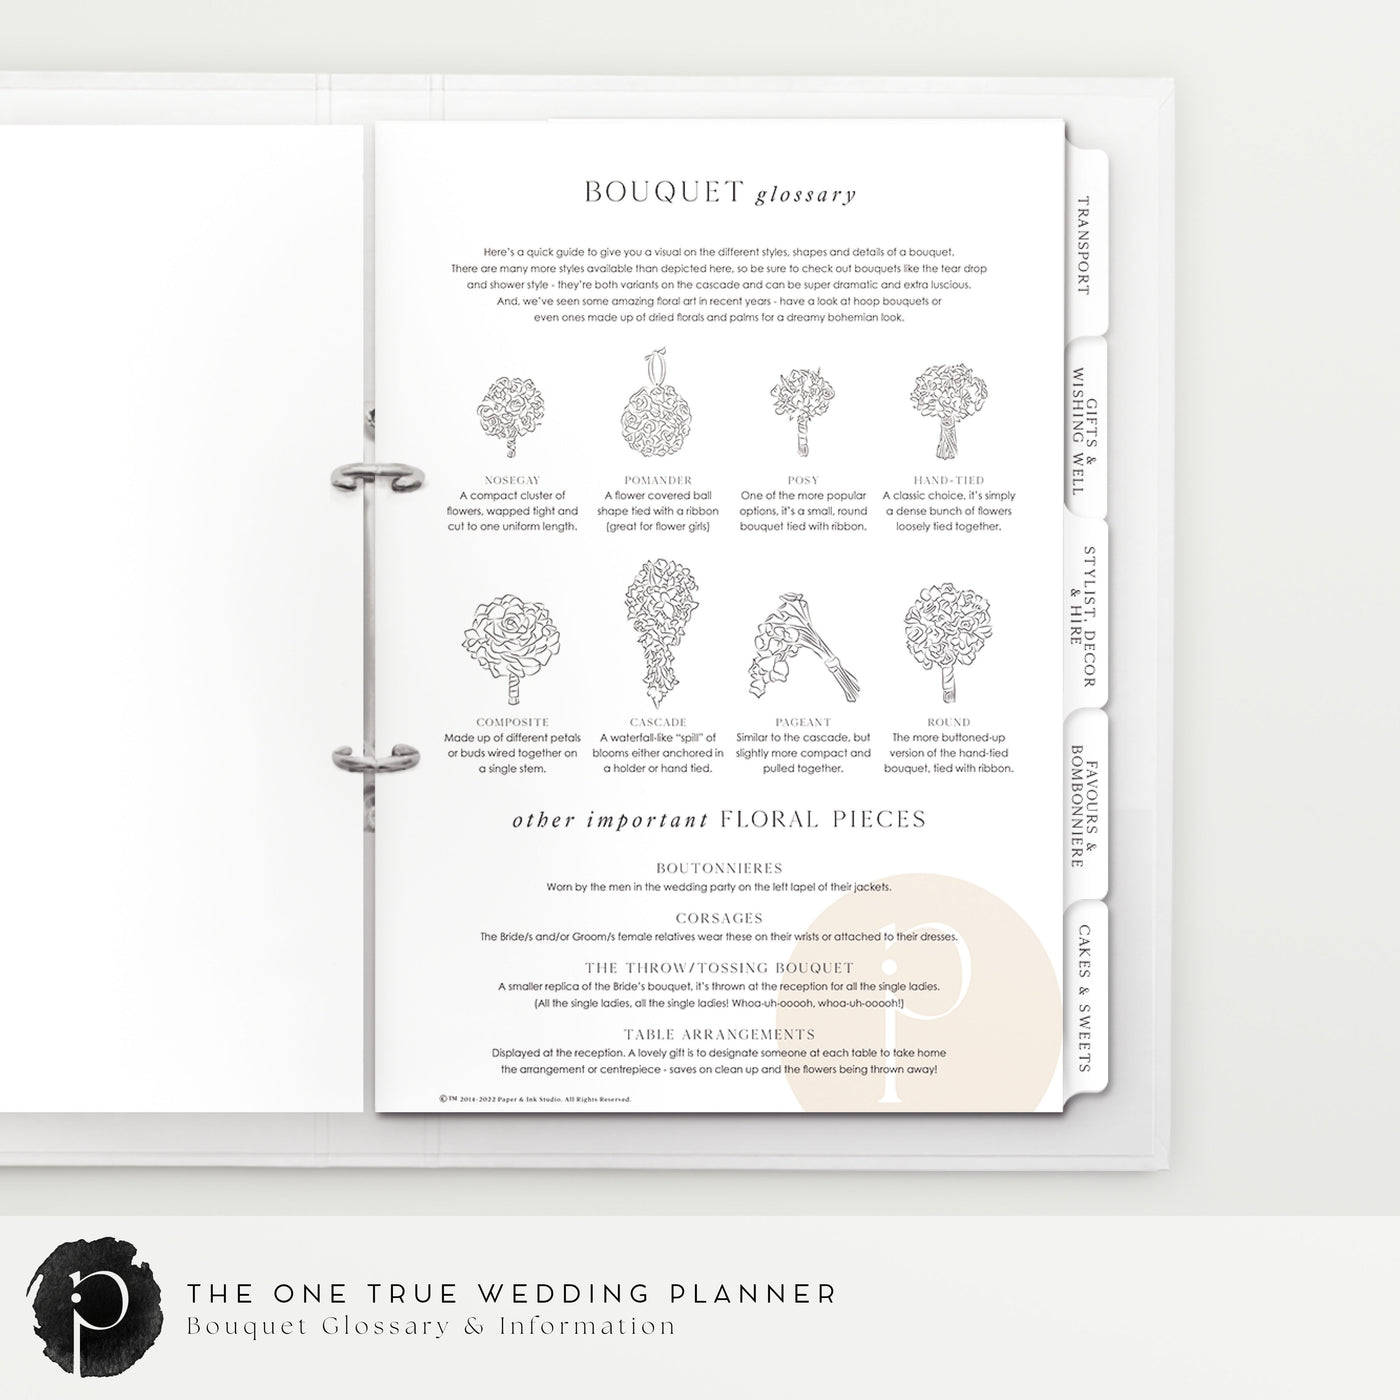 An example image of some of the wedding florist and wedding bouquet information you can find in the wedding planner and organiser file made by Paper and Ink Studio.